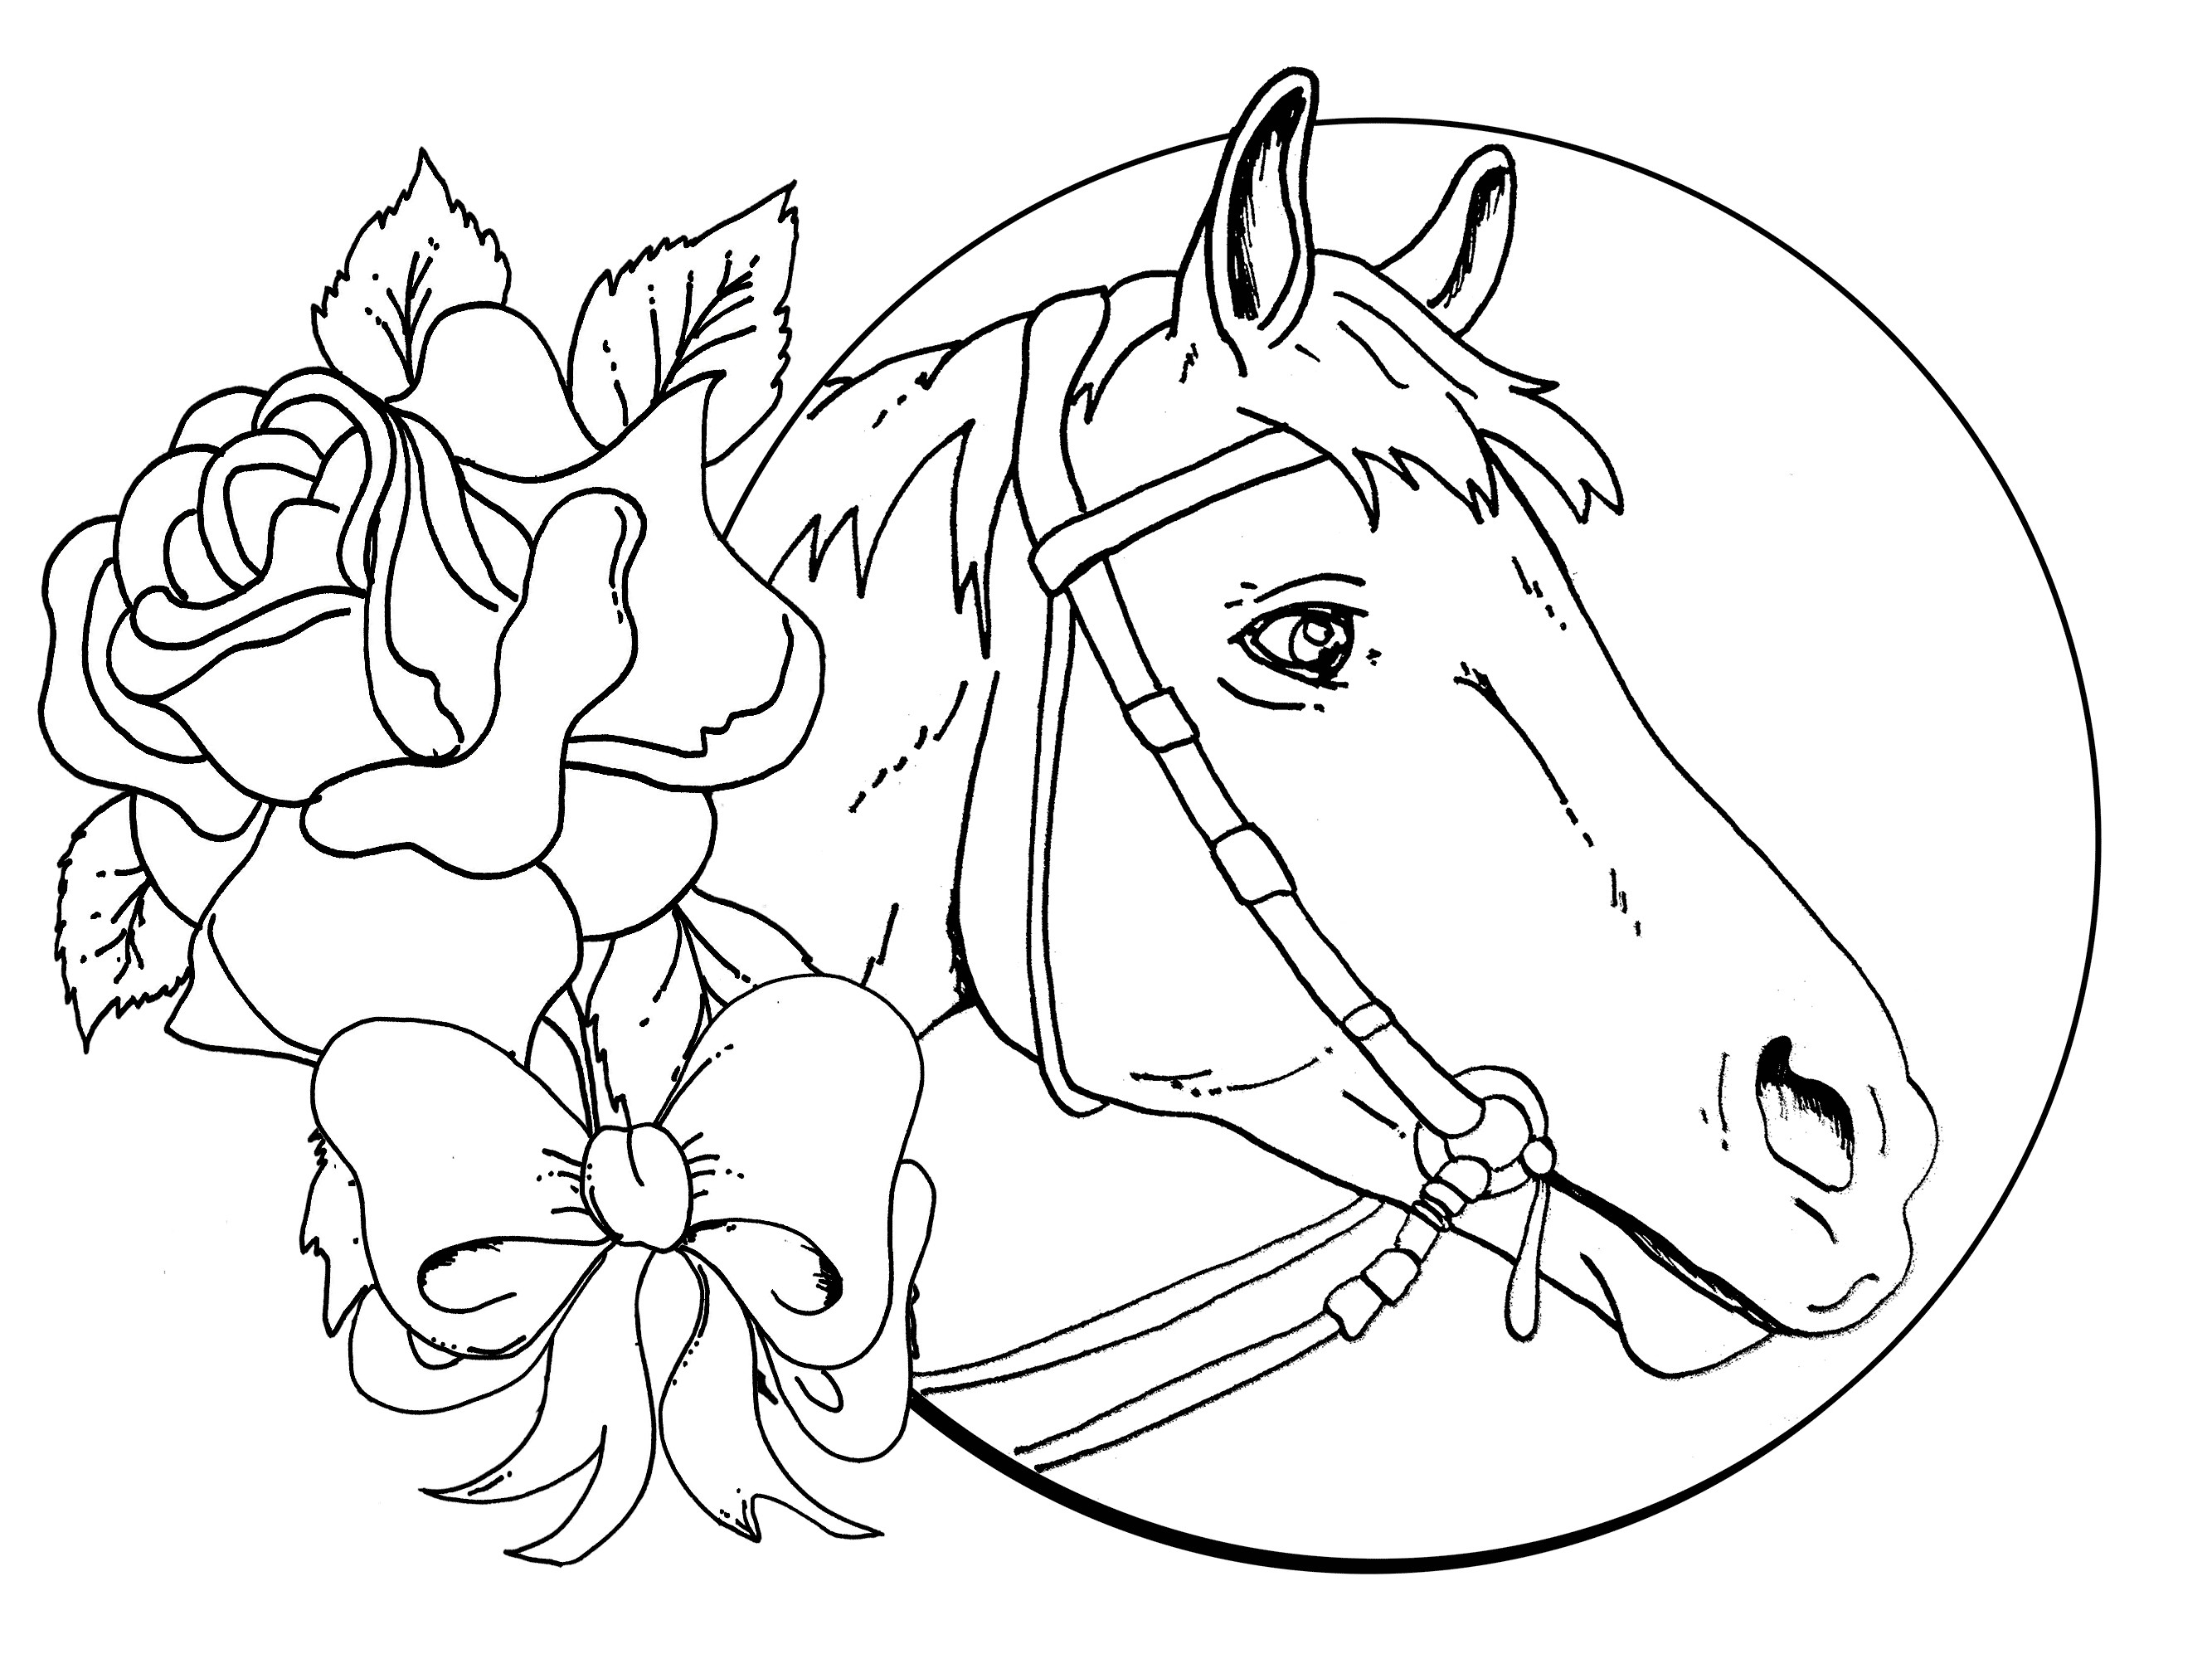 Horse Coloring Pages For Adults
 Coloring Pages Horses Coloring Pages Free Coloring Pages